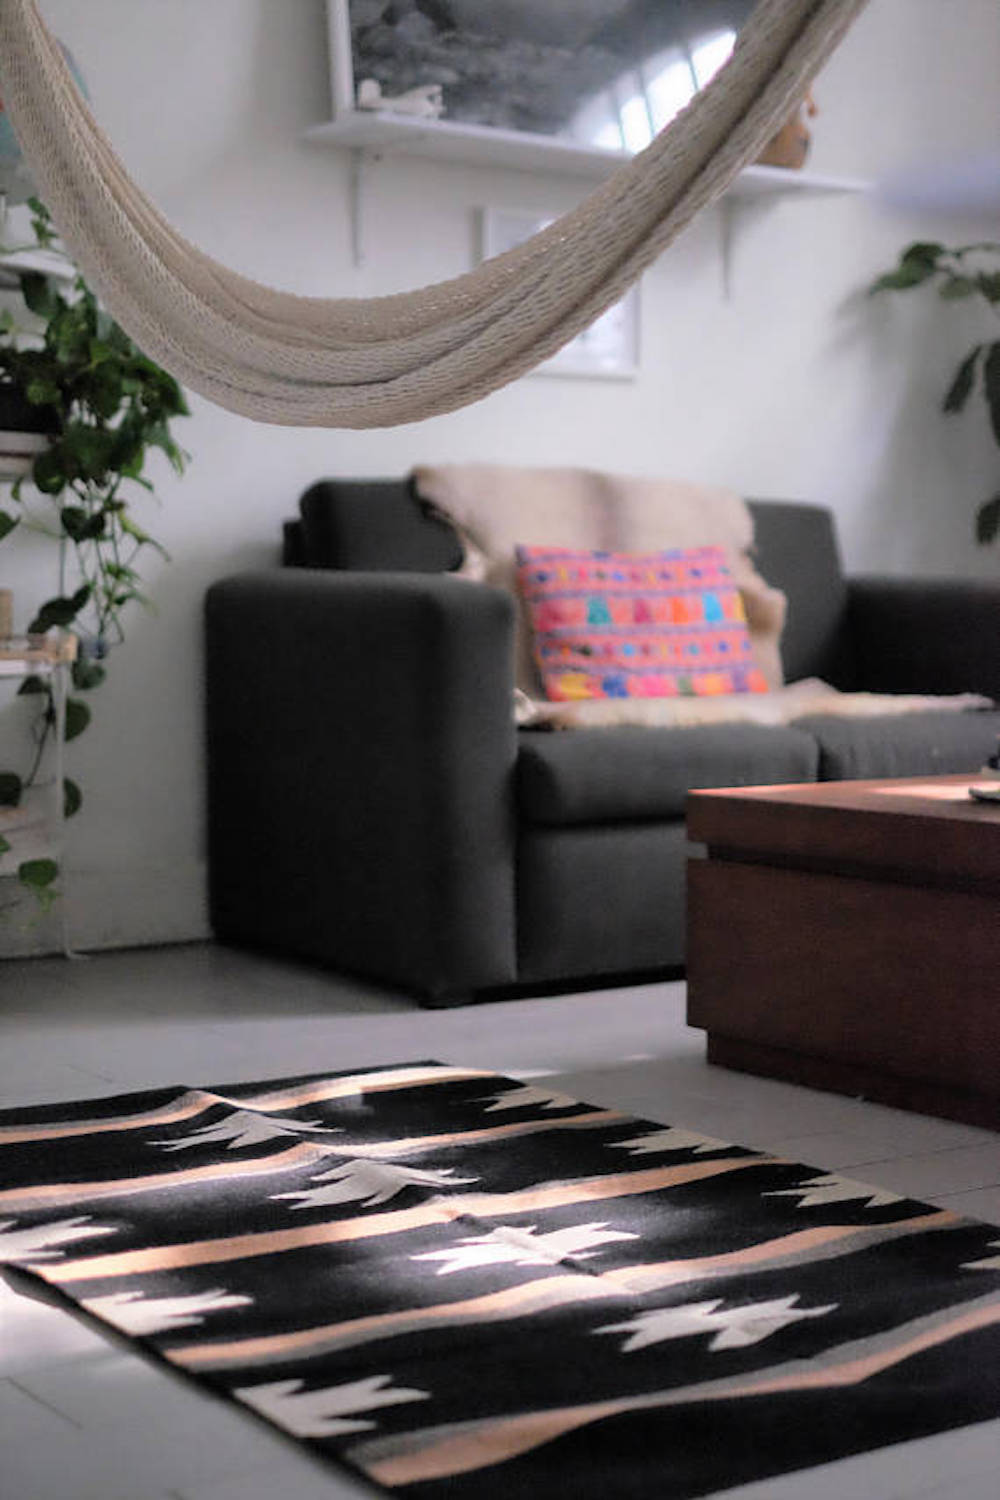 Black and Blush Wool Rug from Oaxaca – This rug is woven on a footloom by our artisan partners in Oaxaca, Mexico. The co-op focuses on job training for women, providing more opportunities in the community.